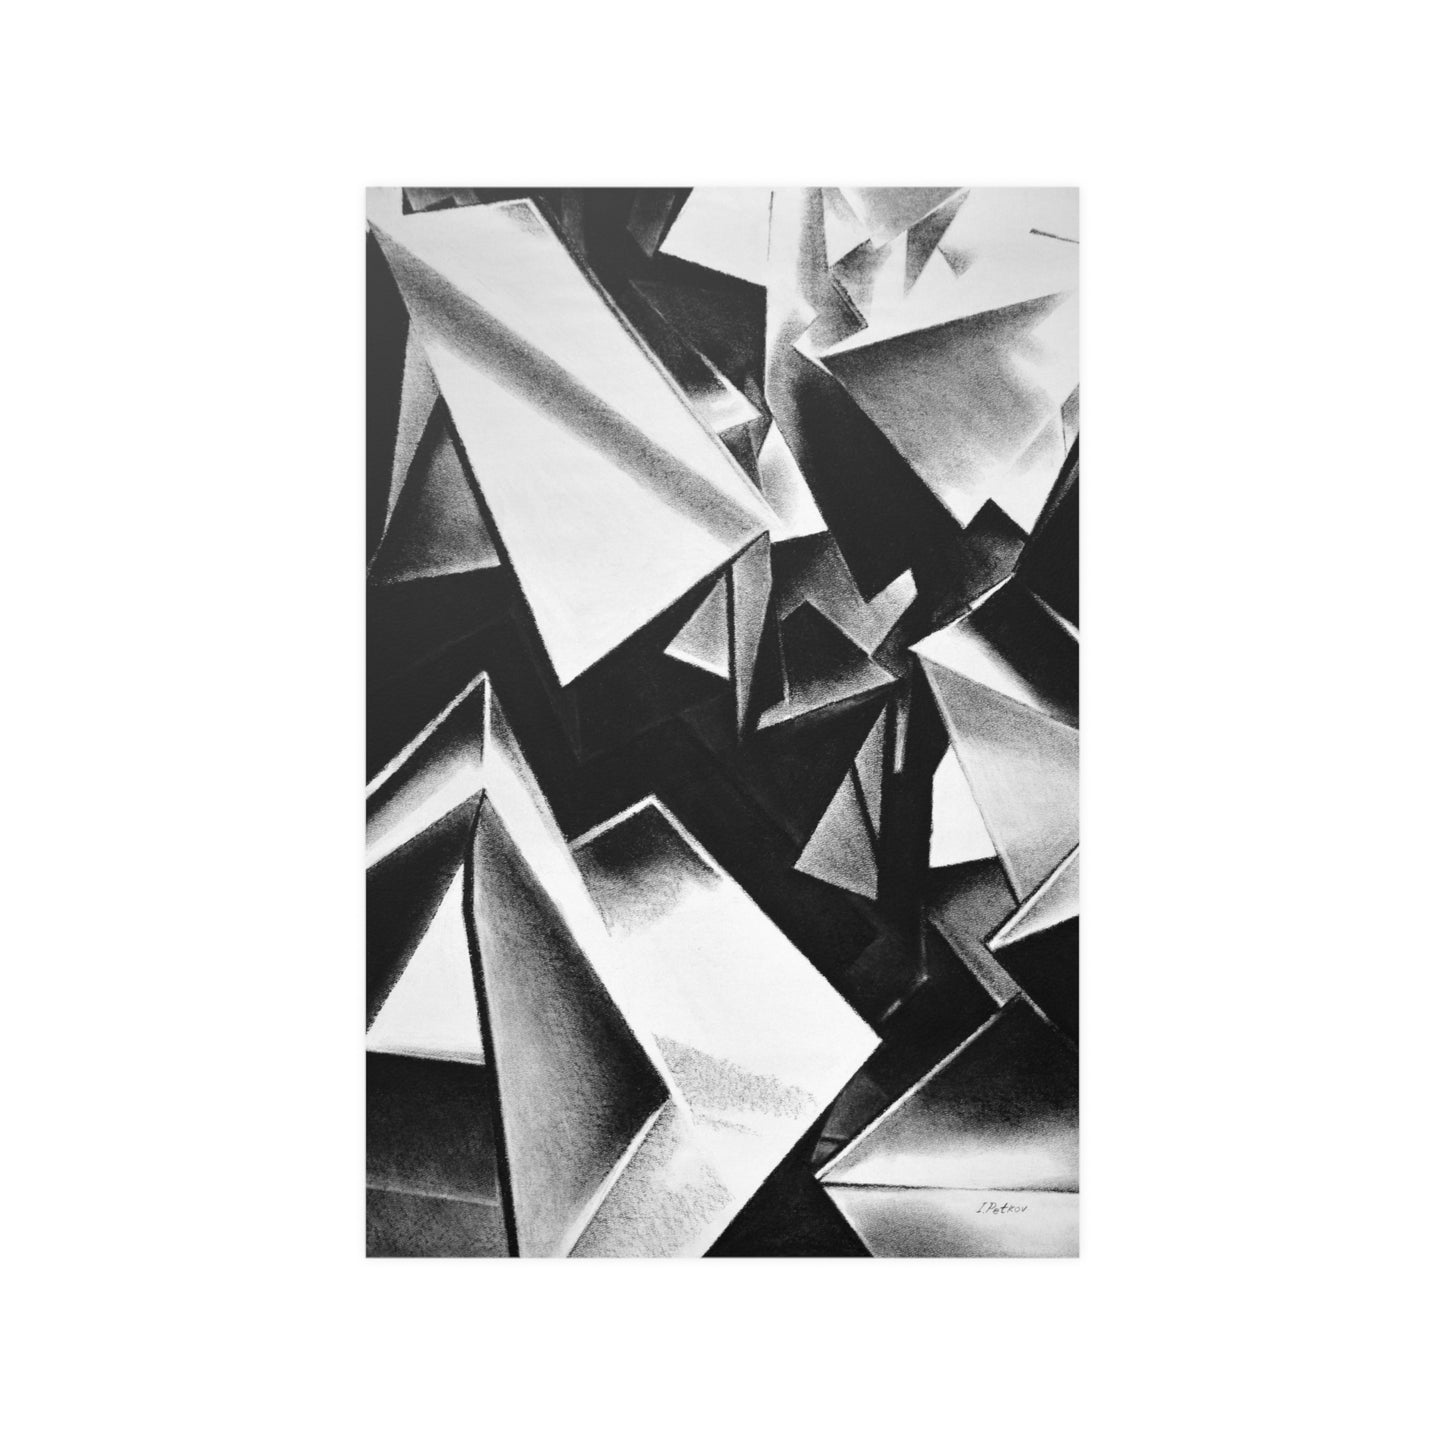 Chaotic Structure -  Unframed Satin Poster Print, Wall Art, Charcoal, Abstract Black and White Decor